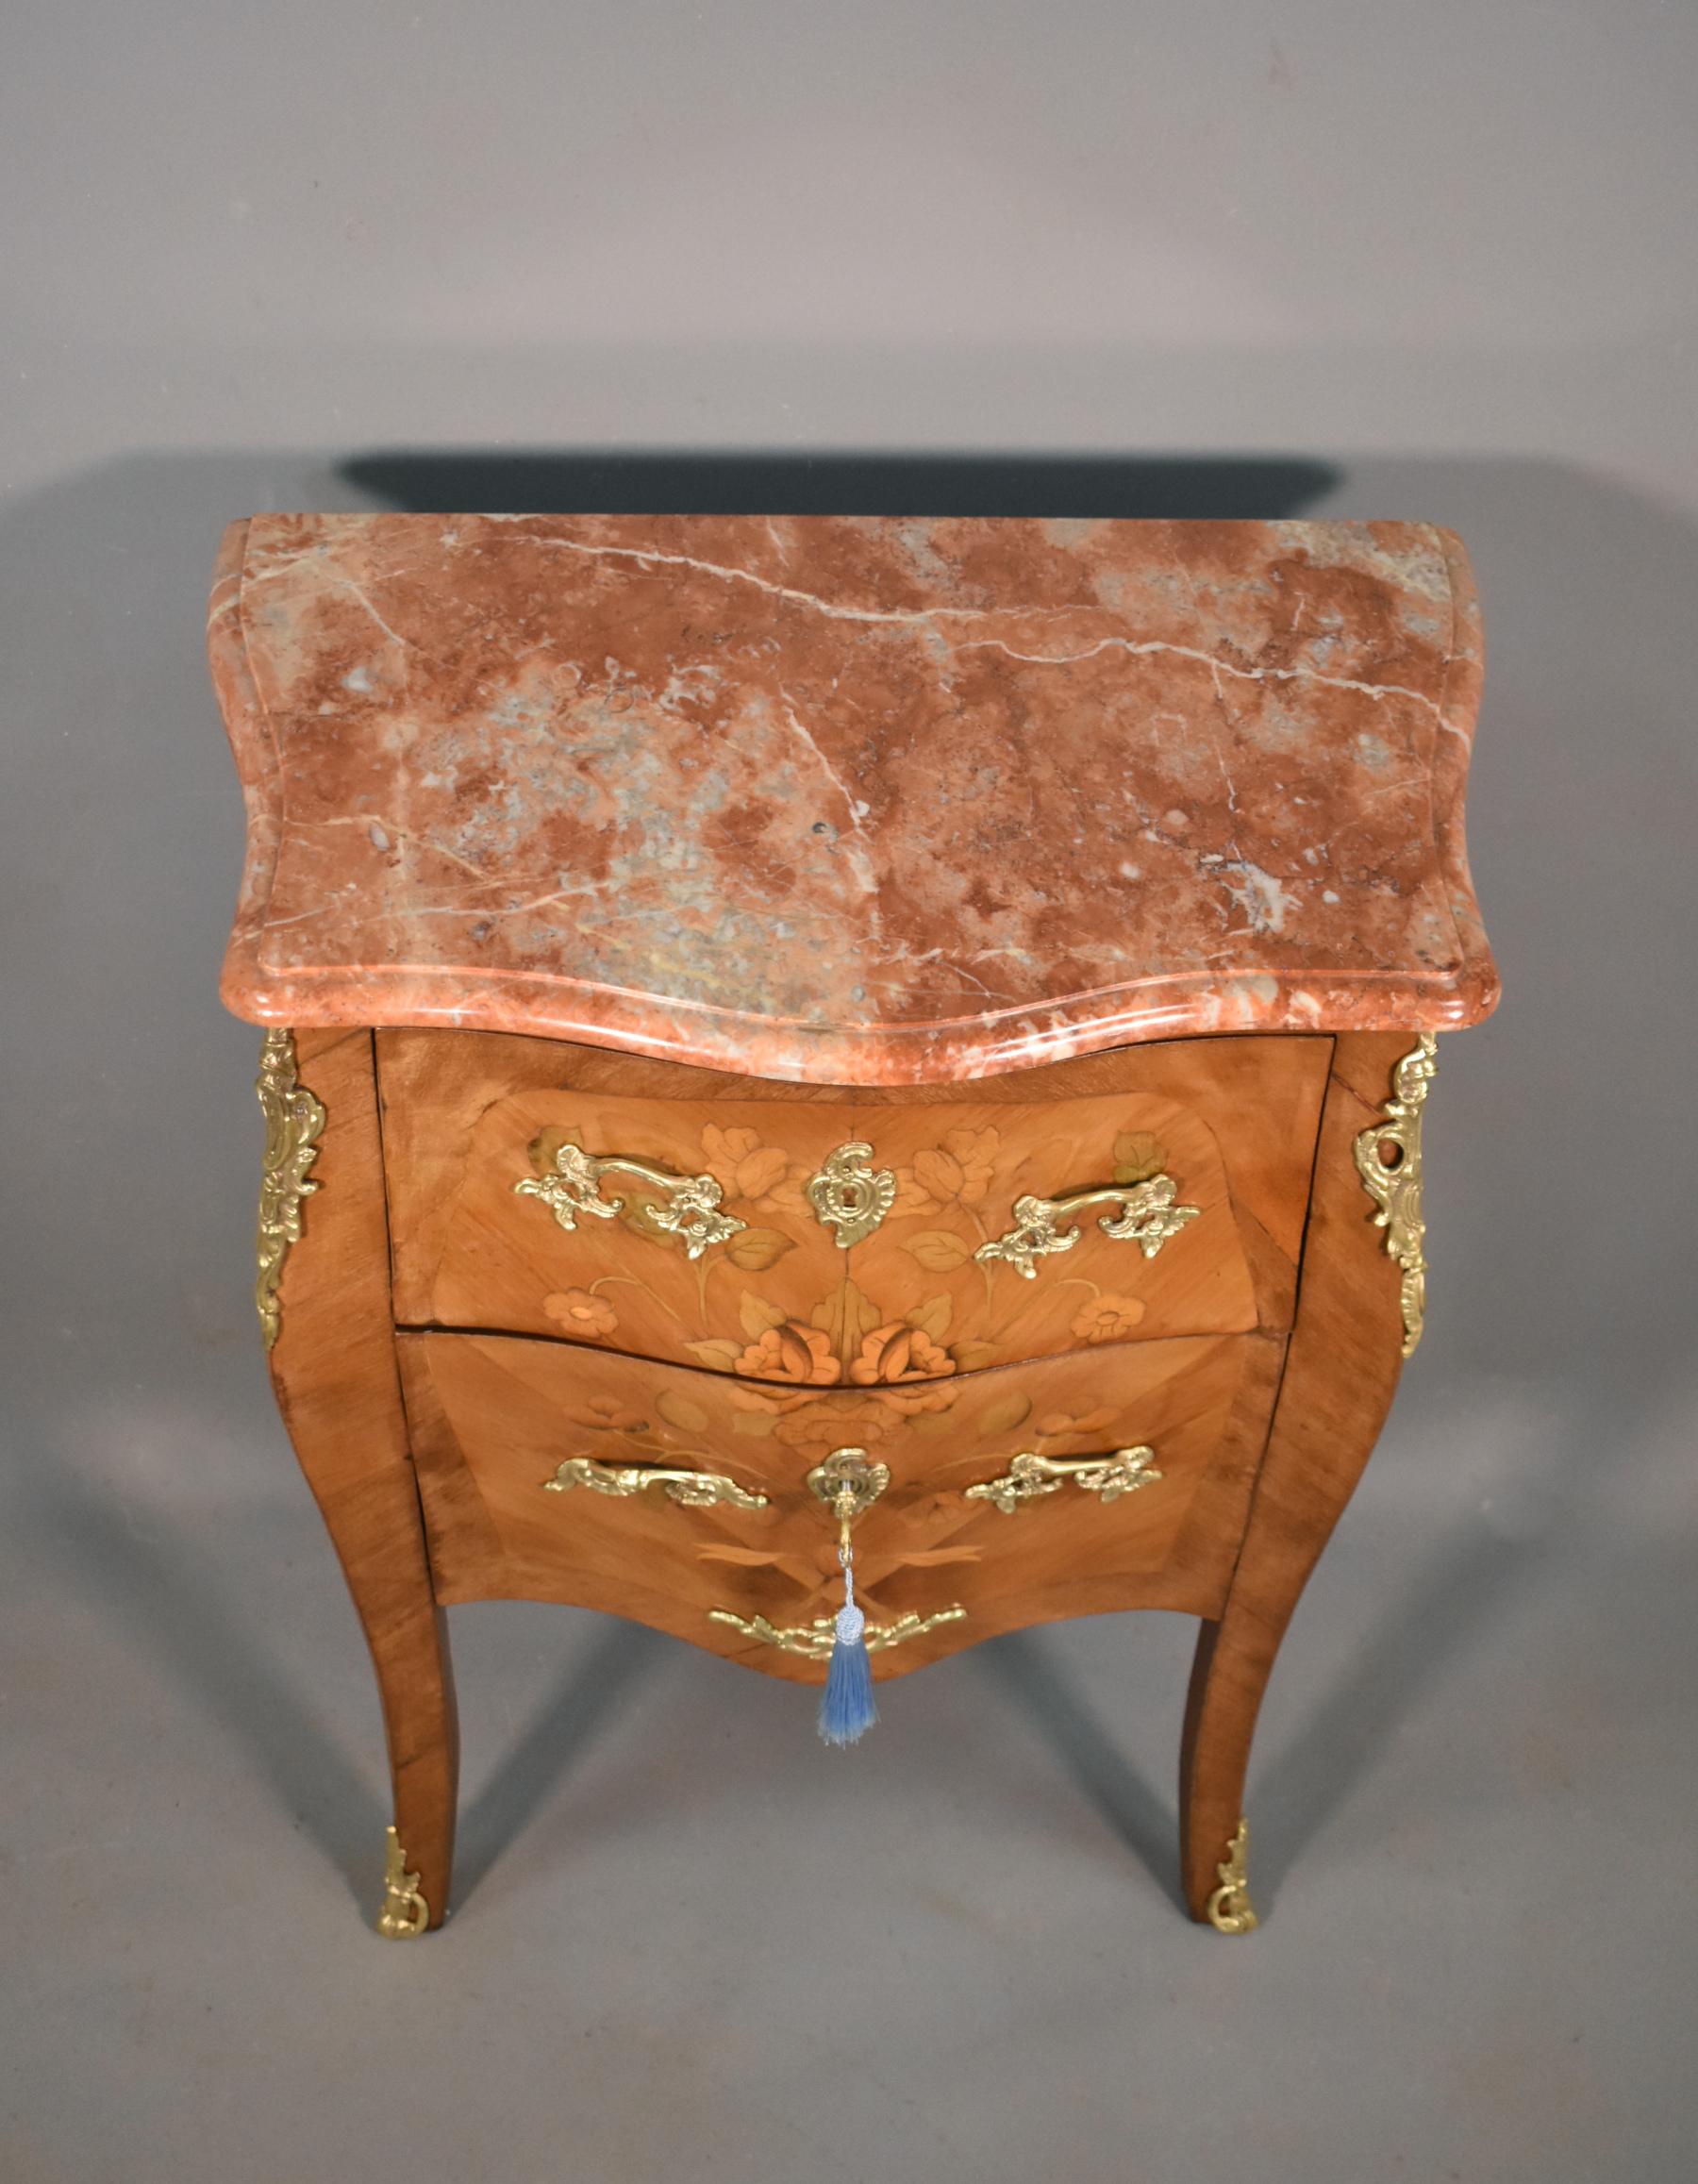 Antique French Louis XV Revival Marquetry Bombe Commode 19C For Sale 2